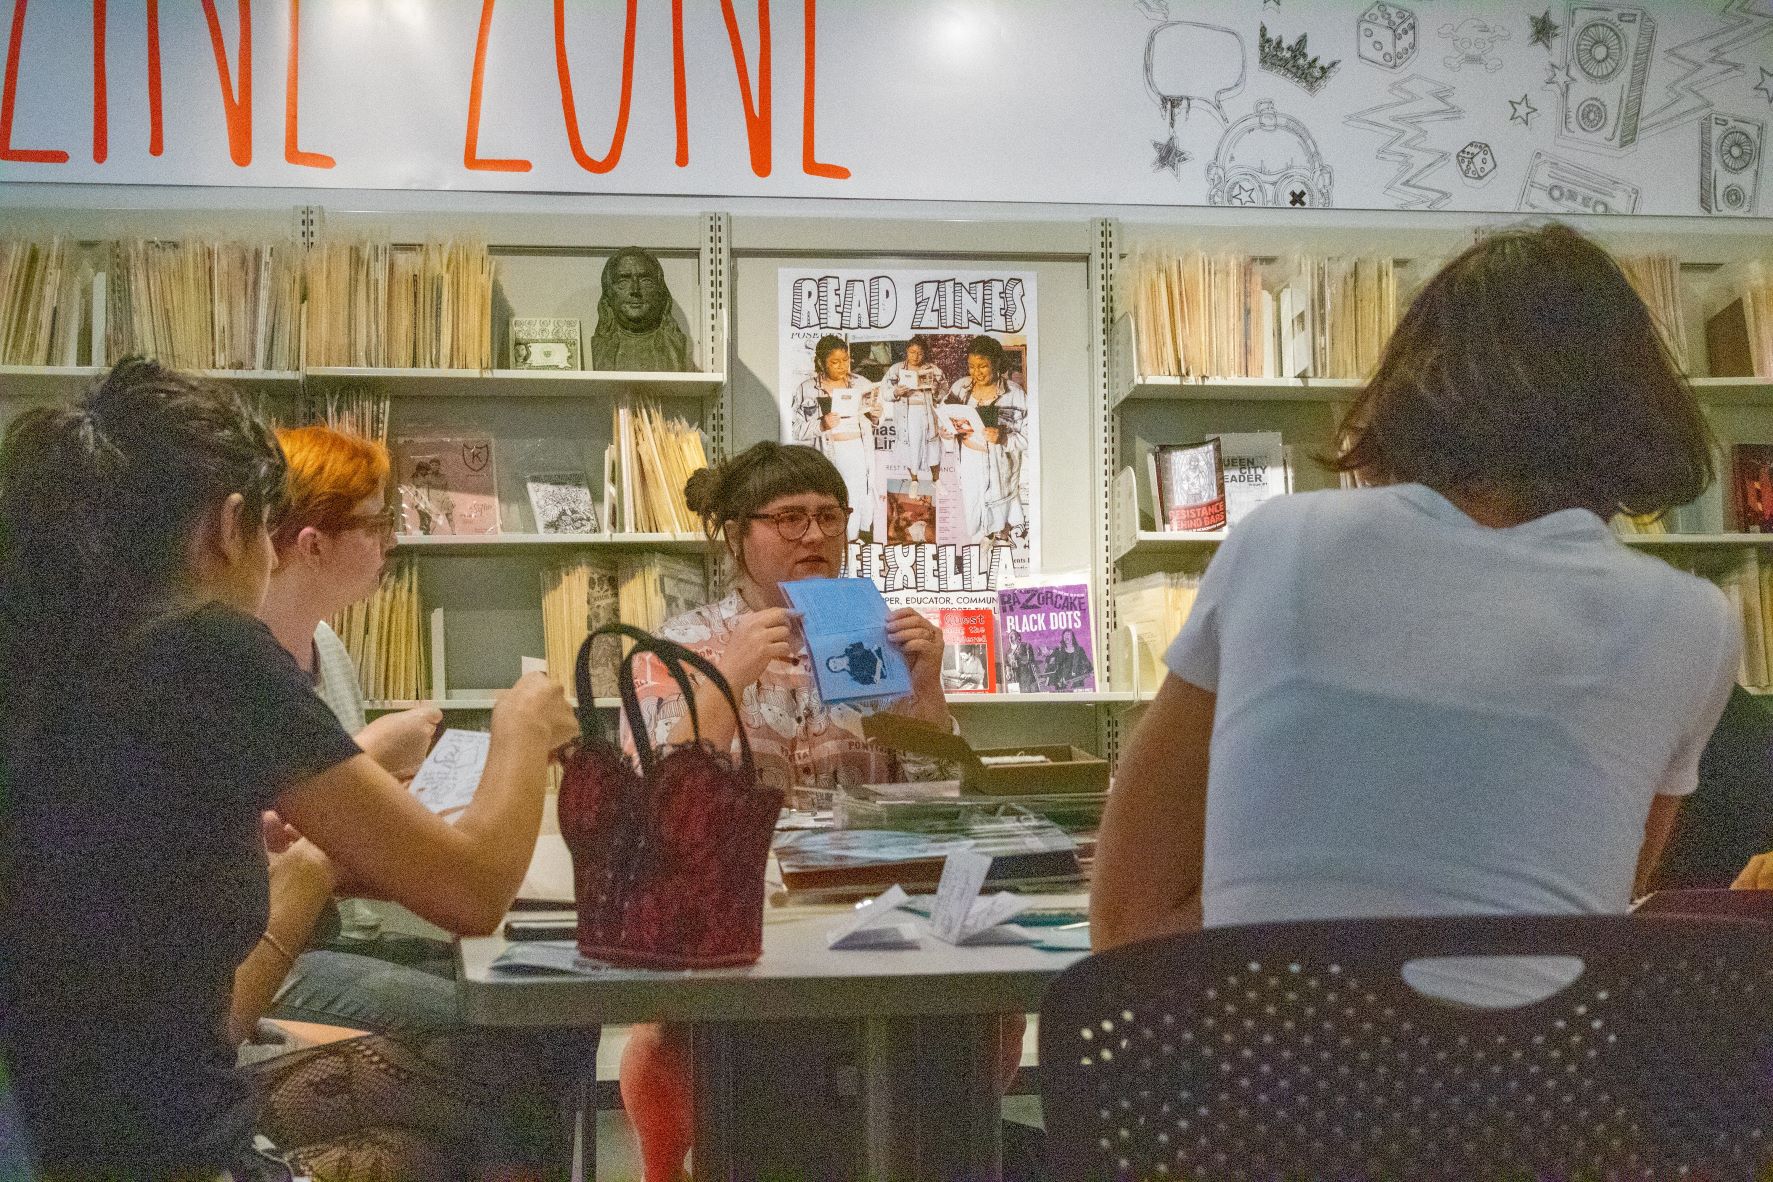 Zinesters meeting in the library's Zine Zone